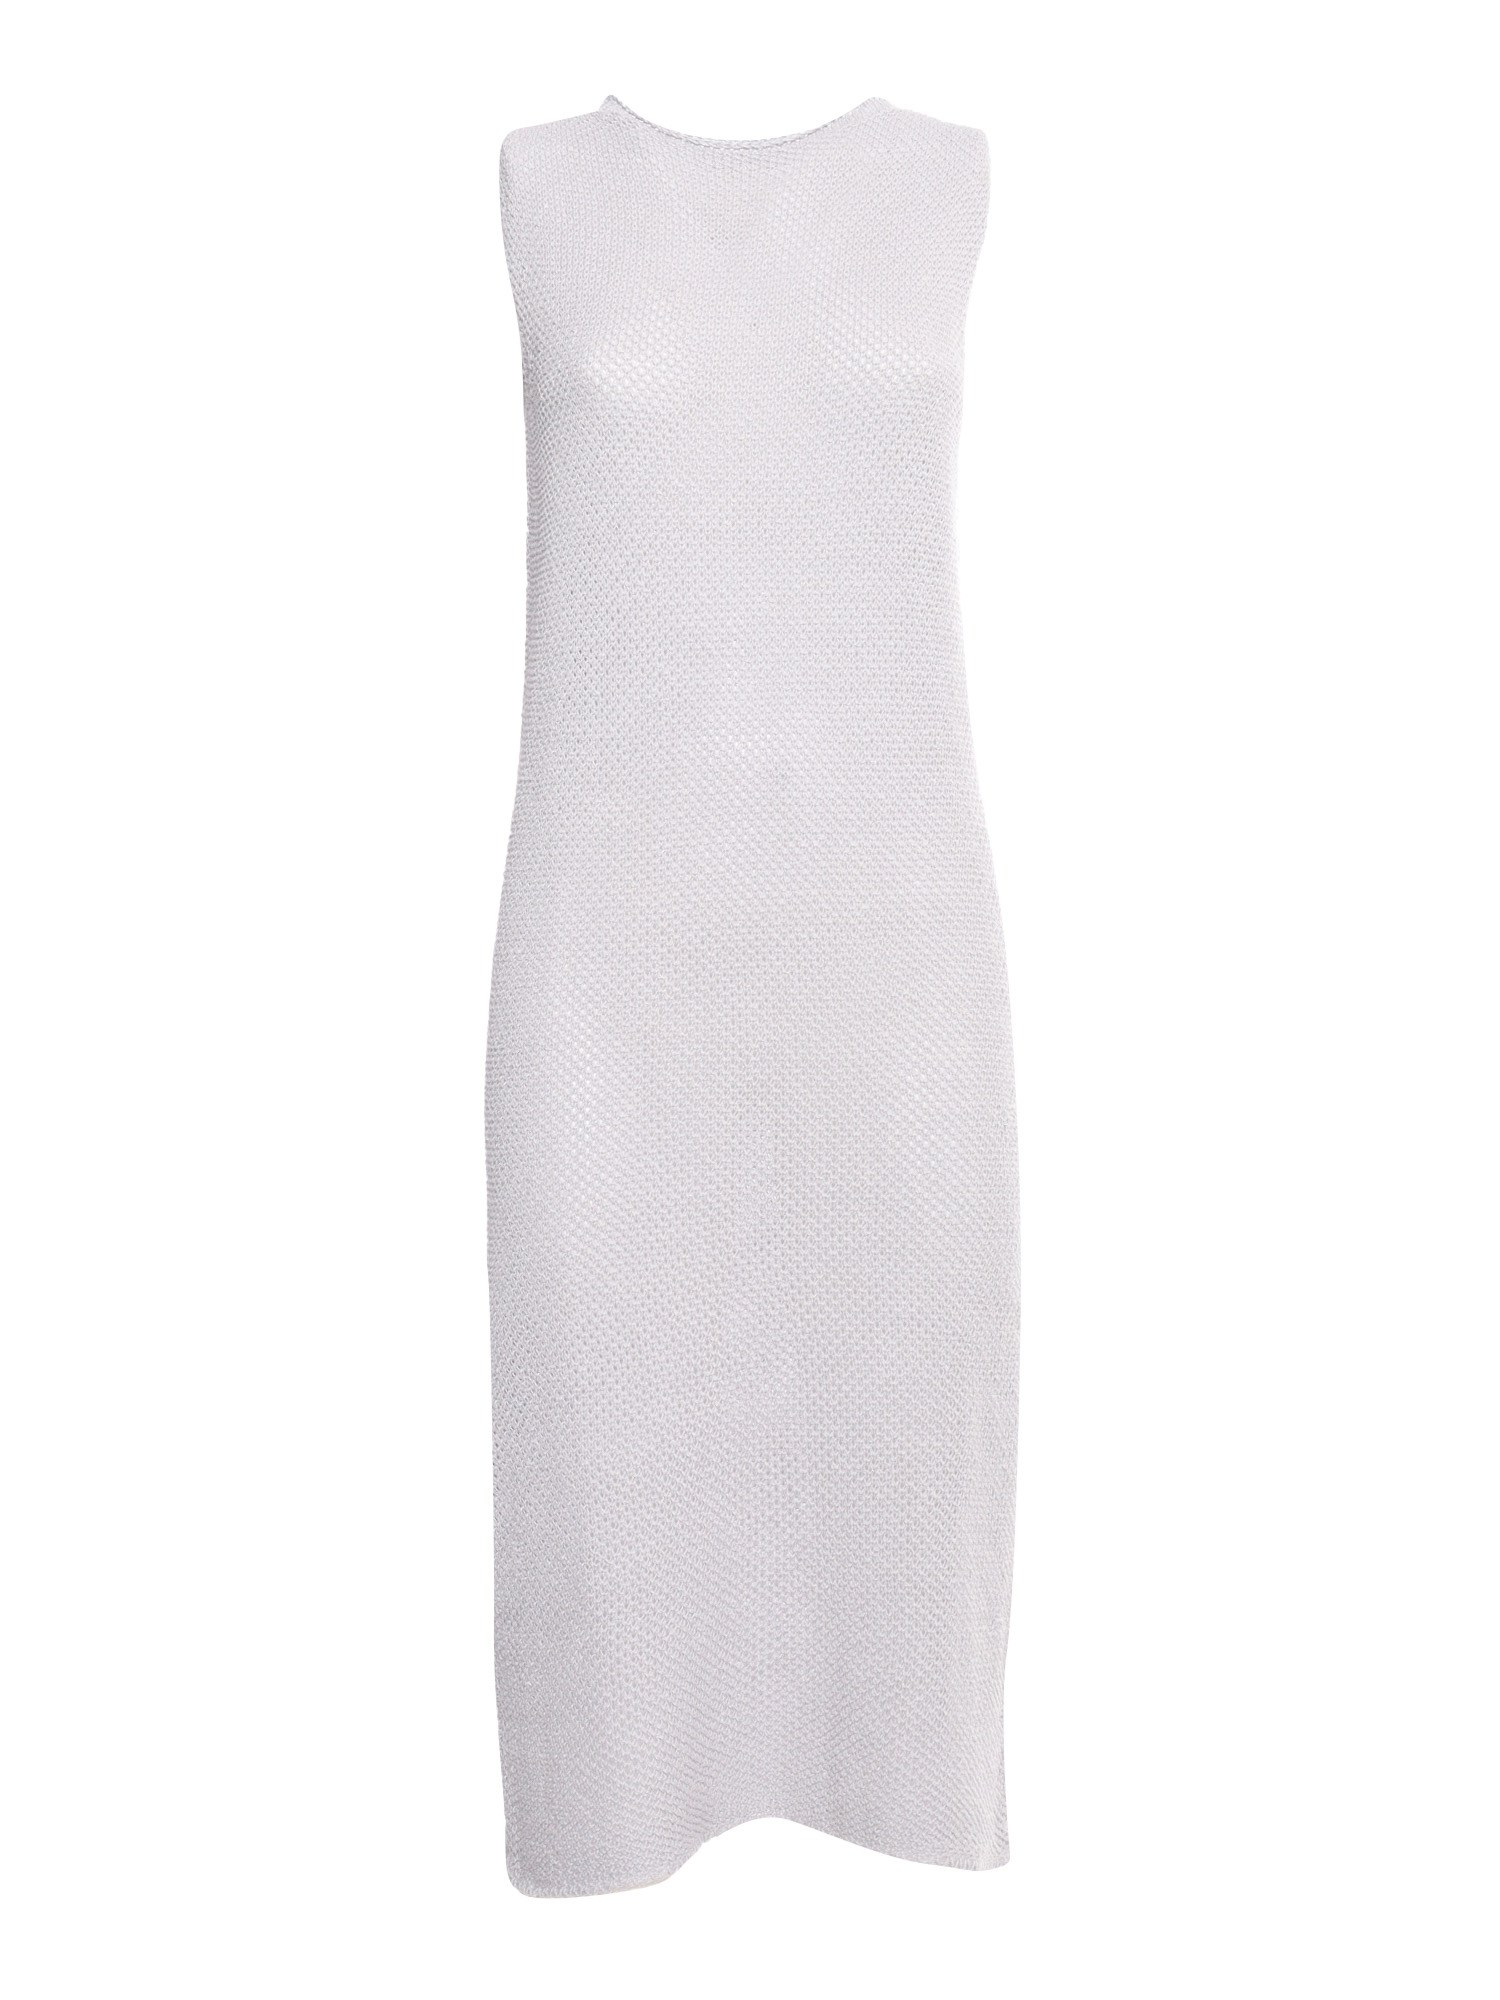 Shop Antonelli Firenze Silver Knitted Tricot Dress